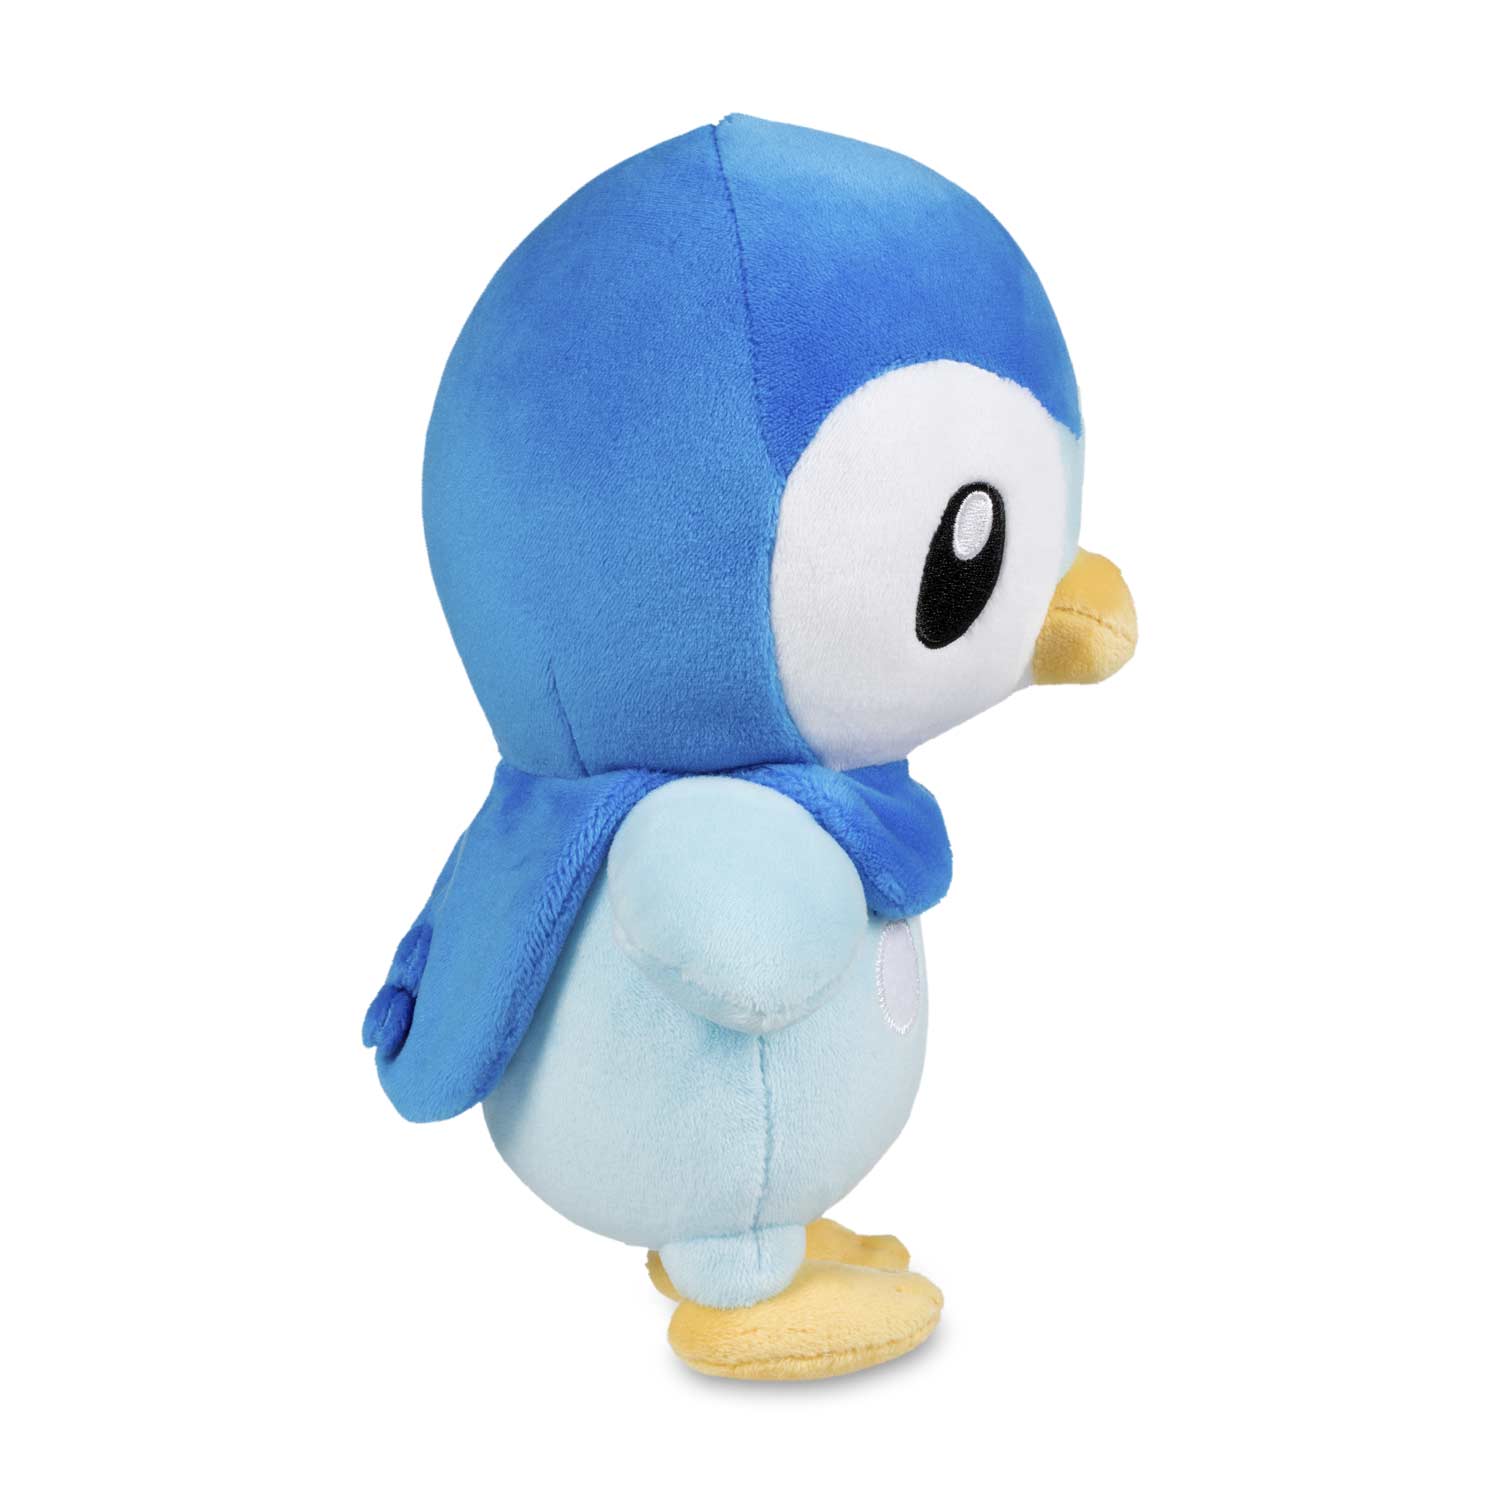 piplup pokedoll